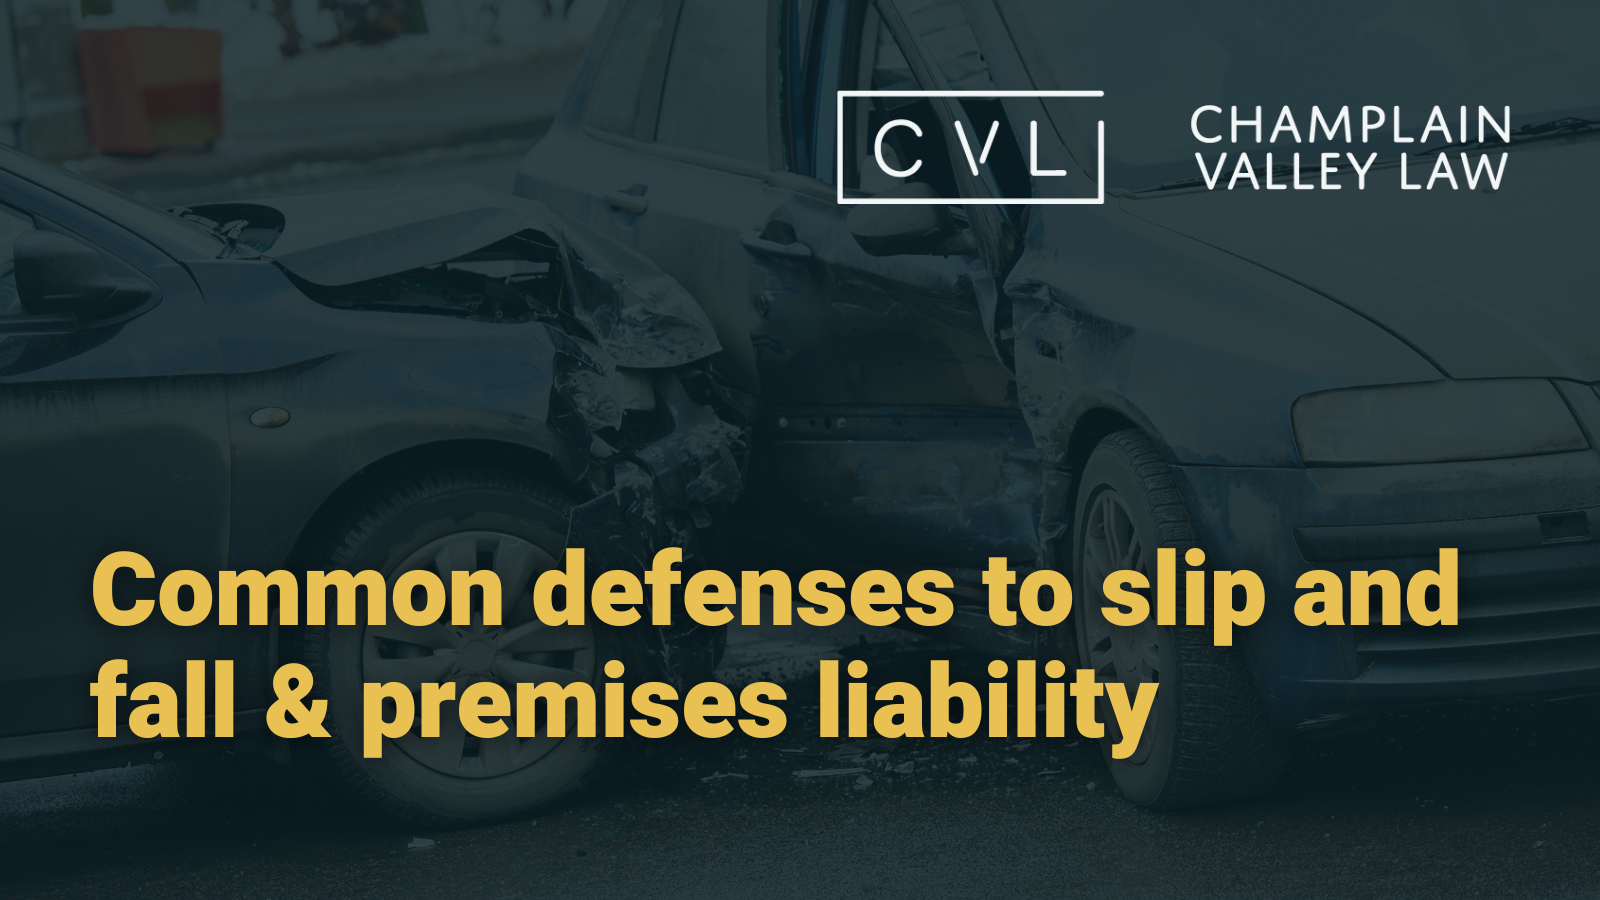 Common defenses to slip and fall & premises liability claims